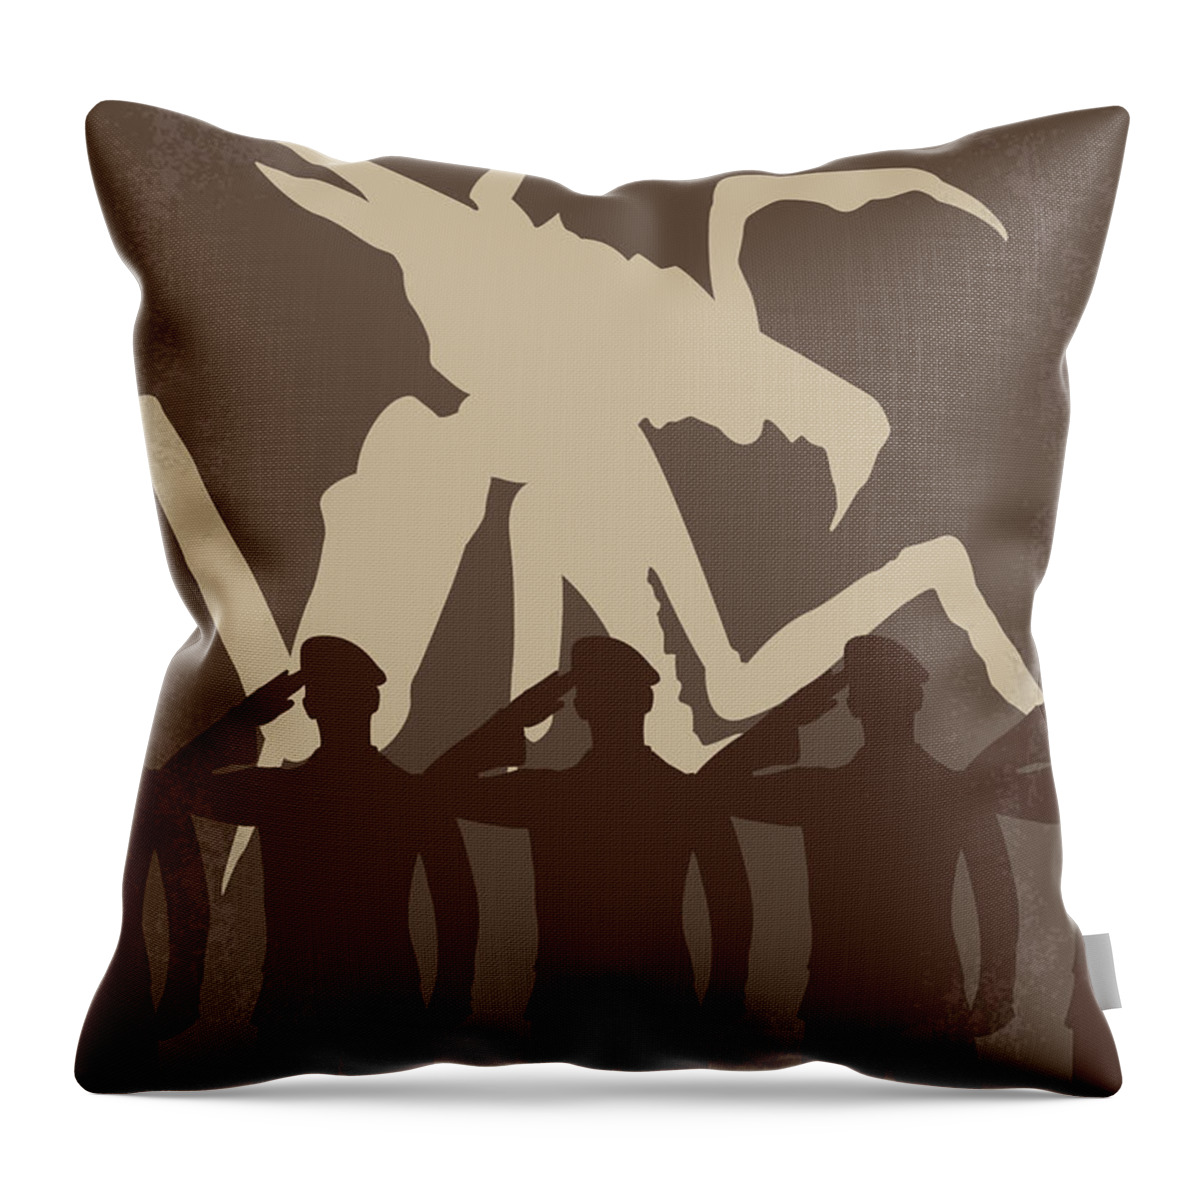 Starship Throw Pillow featuring the digital art No424 My Starship Troopers minimal movie poster by Chungkong Art